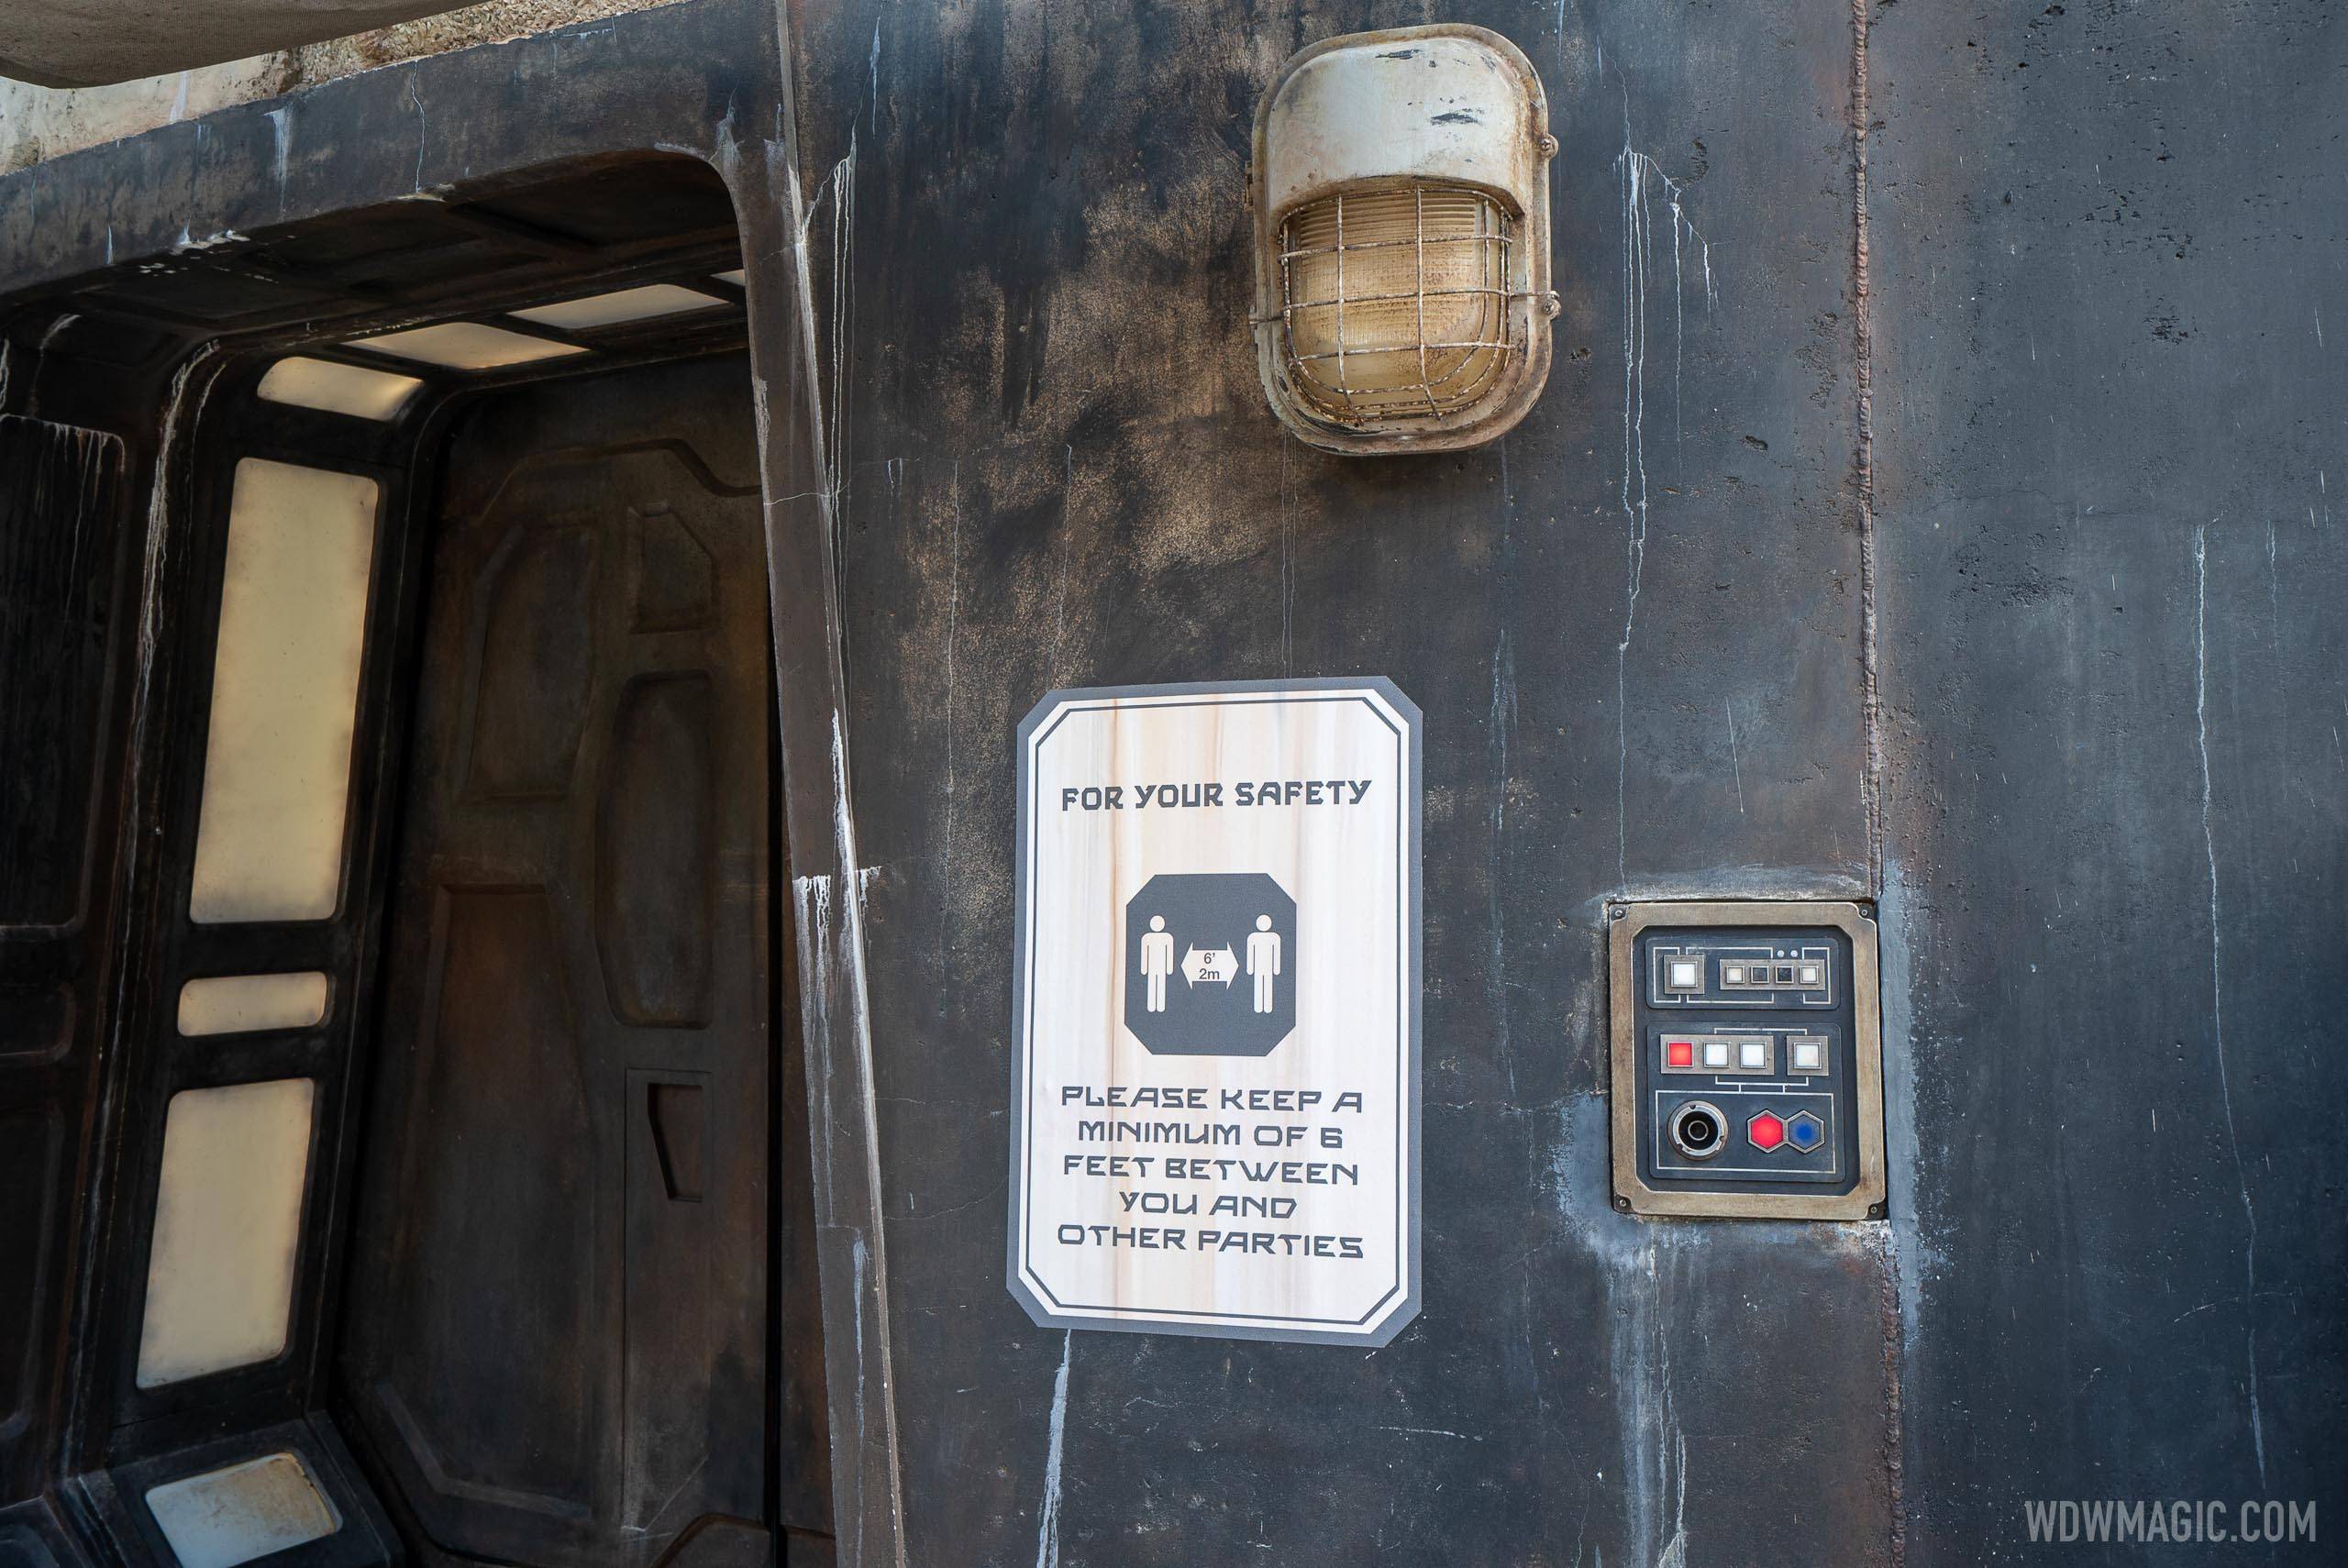 Themed physical distancing safety signs in Galaxy's Edge